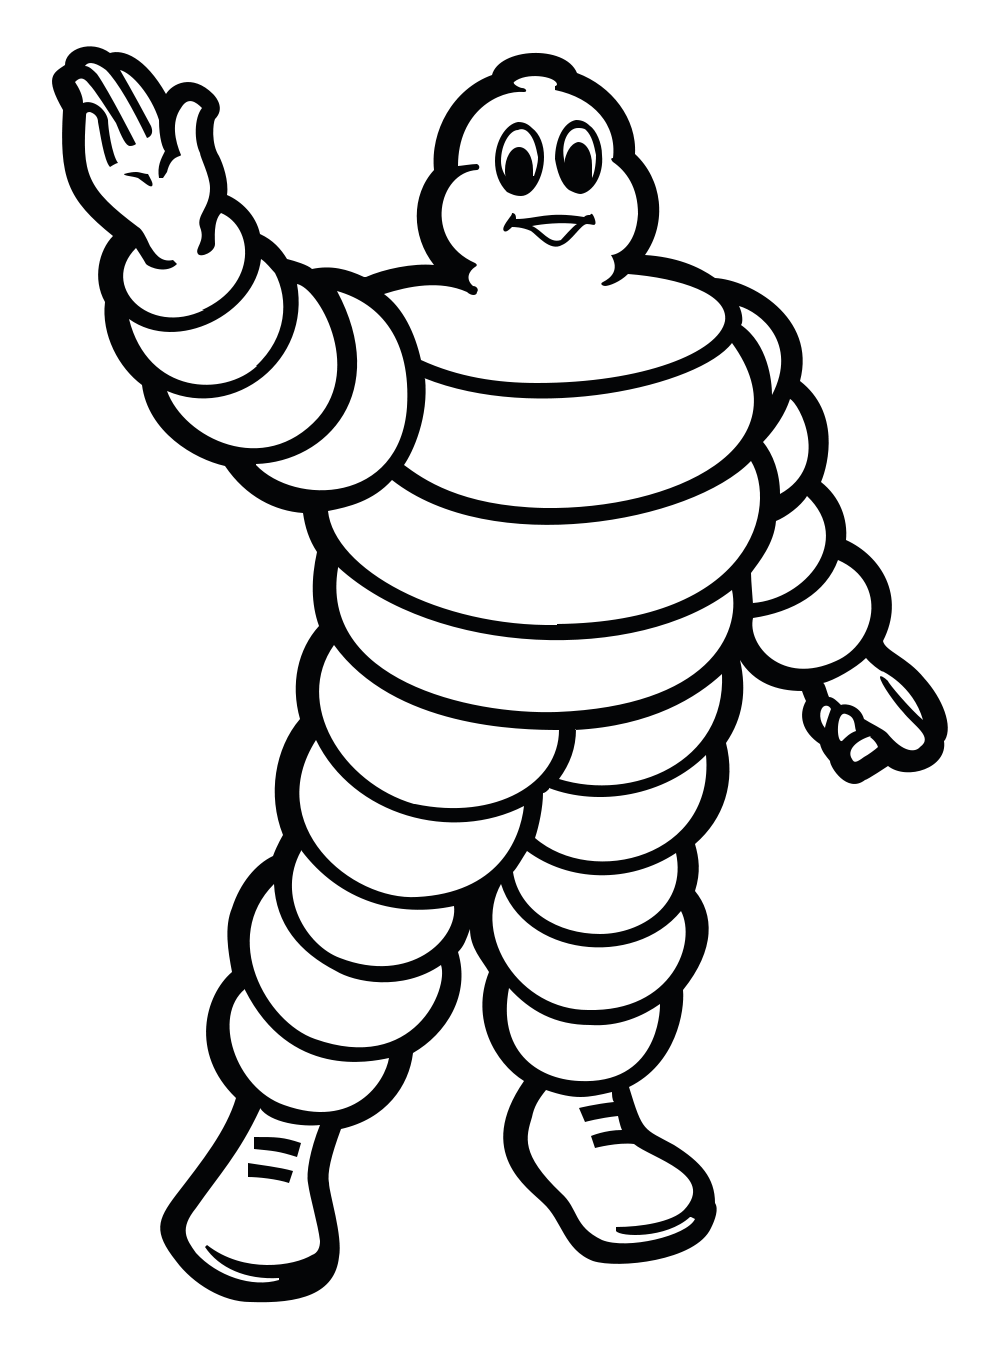 Bibendum, Commonly Referred To in English As the Michelin Man or Michelin  Tyre Man, is the Official Mascot of the Michelin Tire Co Editorial Photo -  Image of race, symbol: 224652676